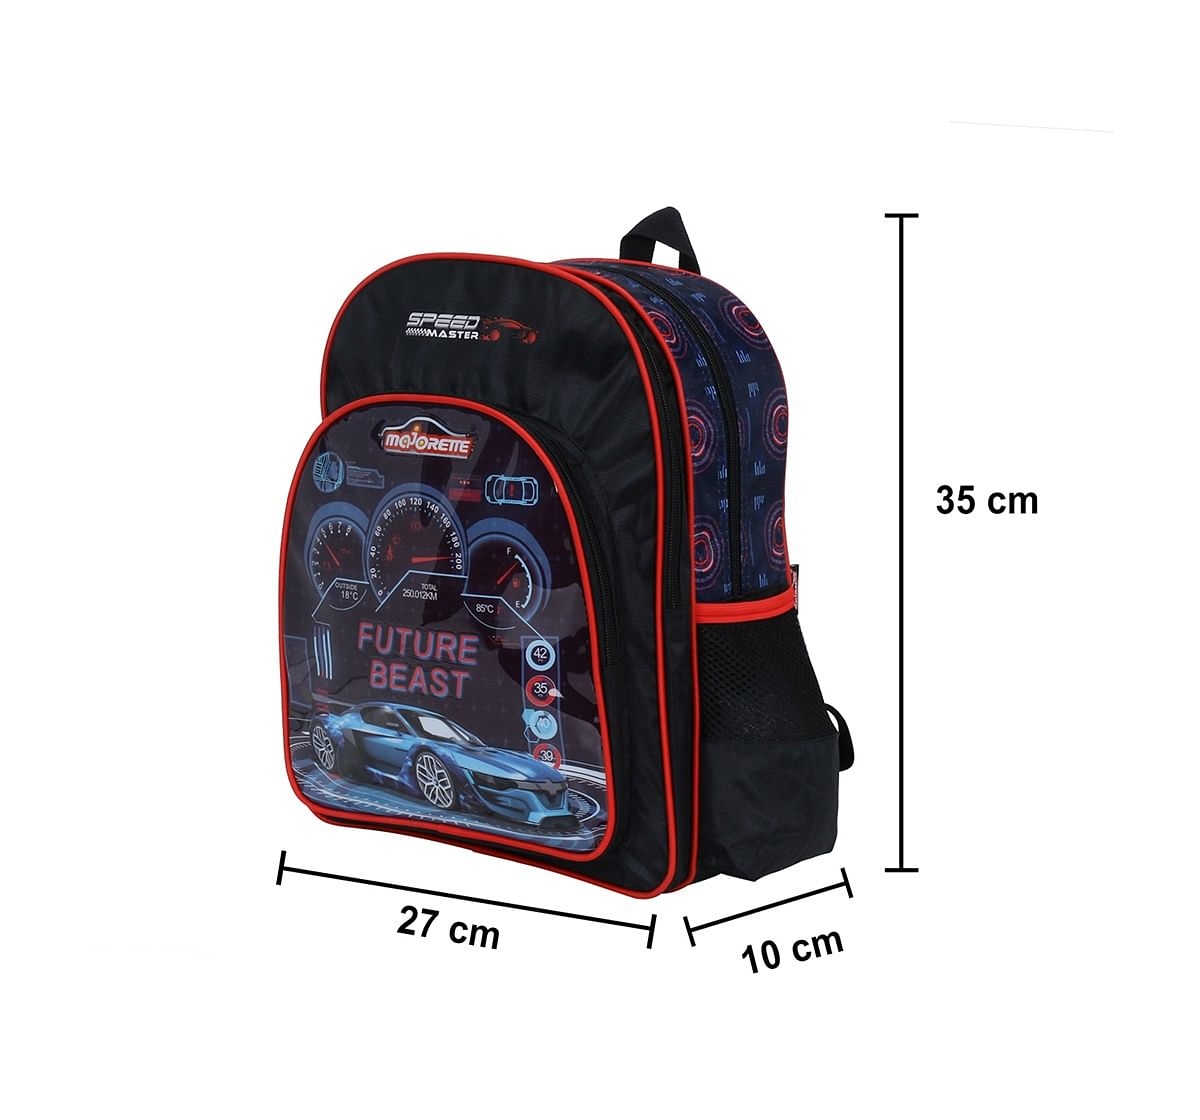 Majorette Future Beast 14 Backpack  Bags for age 3Y+ 